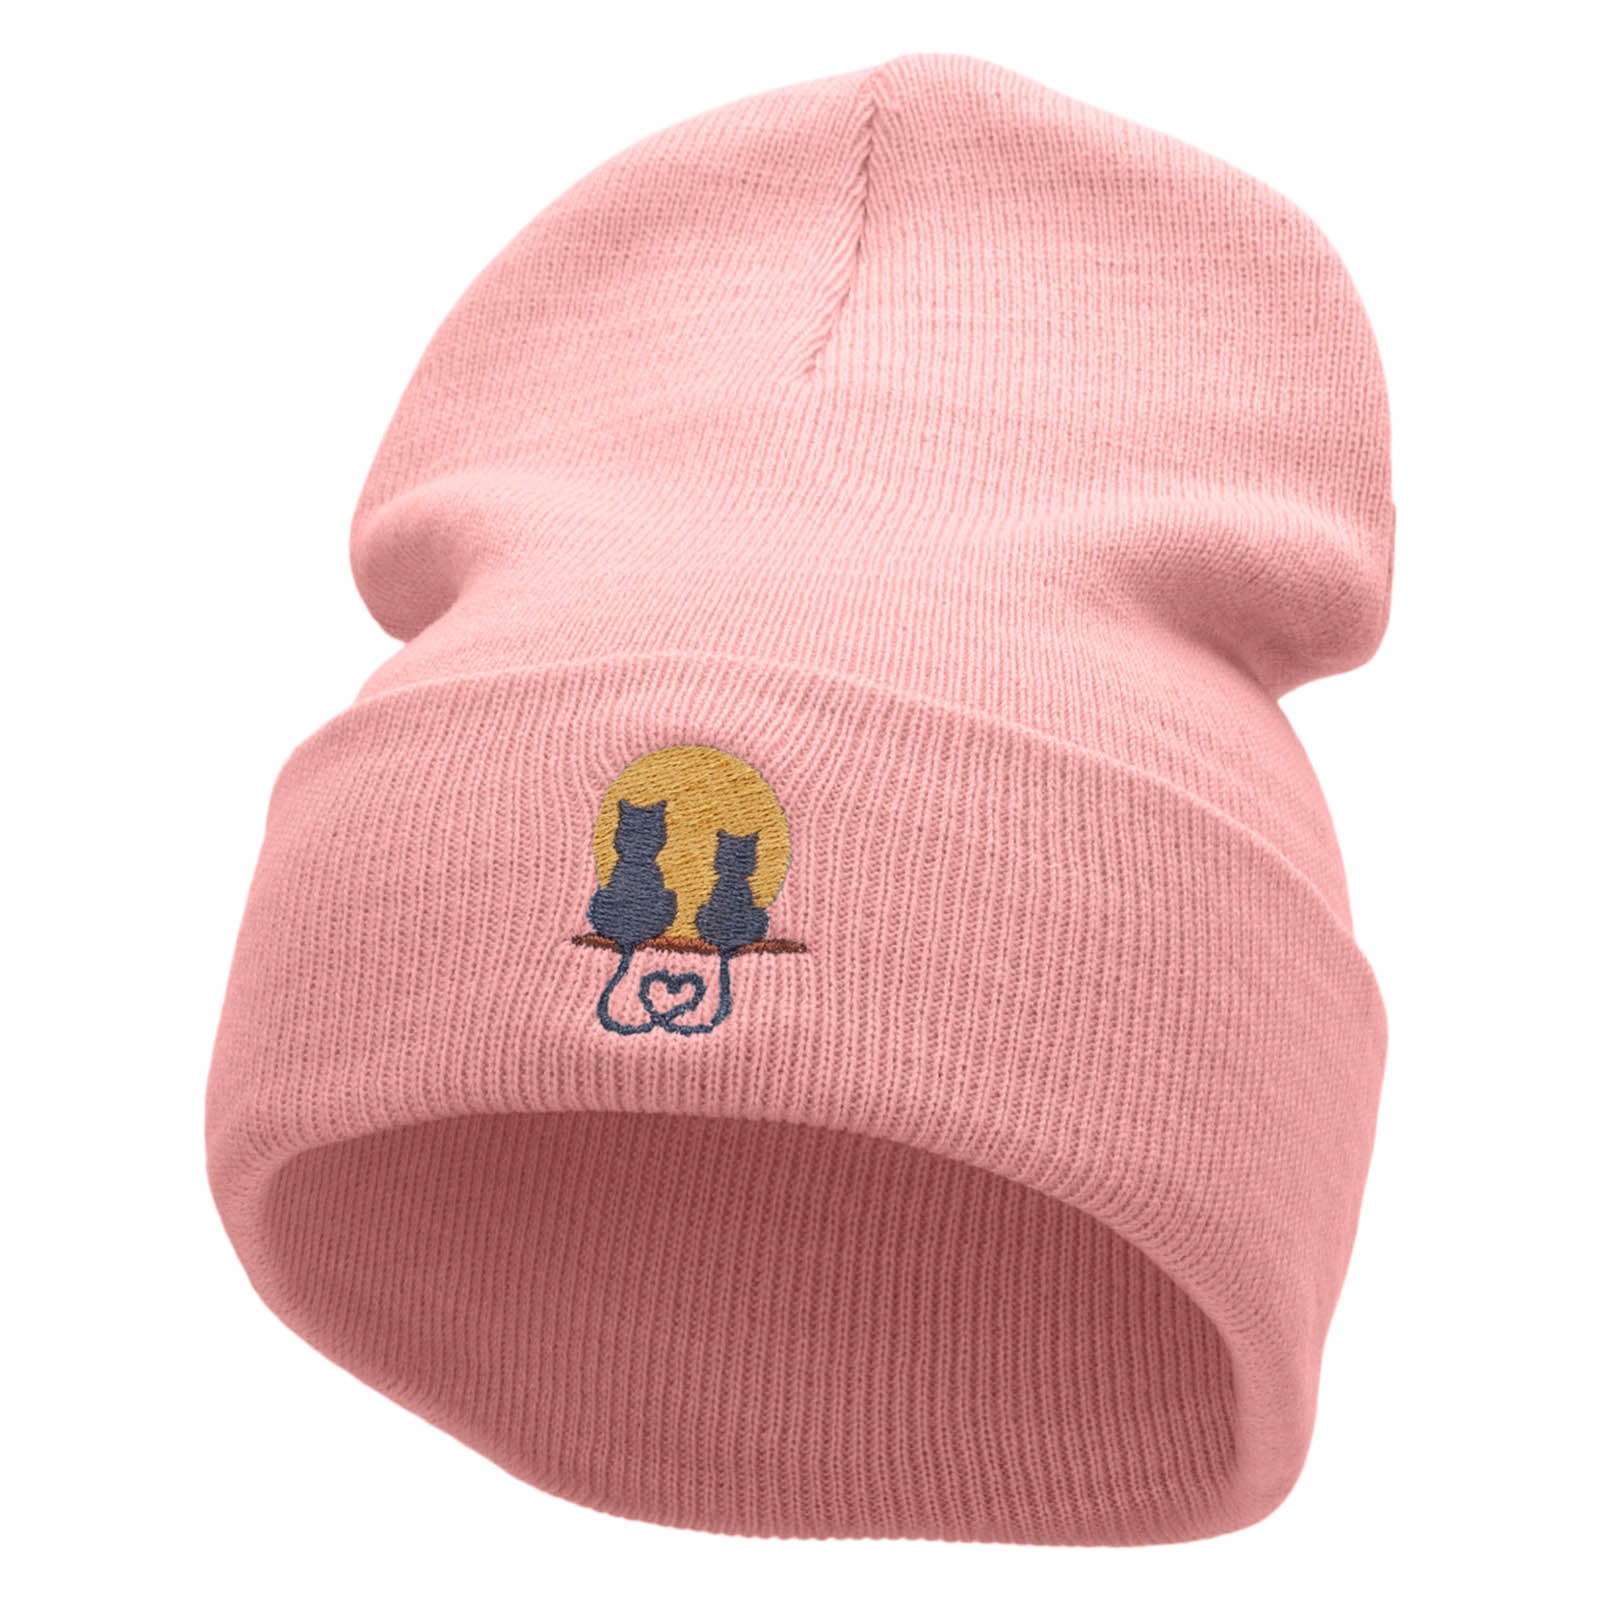 Cat Love Embroidered 12 inch Acrylic Cuffed Long Beanie - Pink OSFM